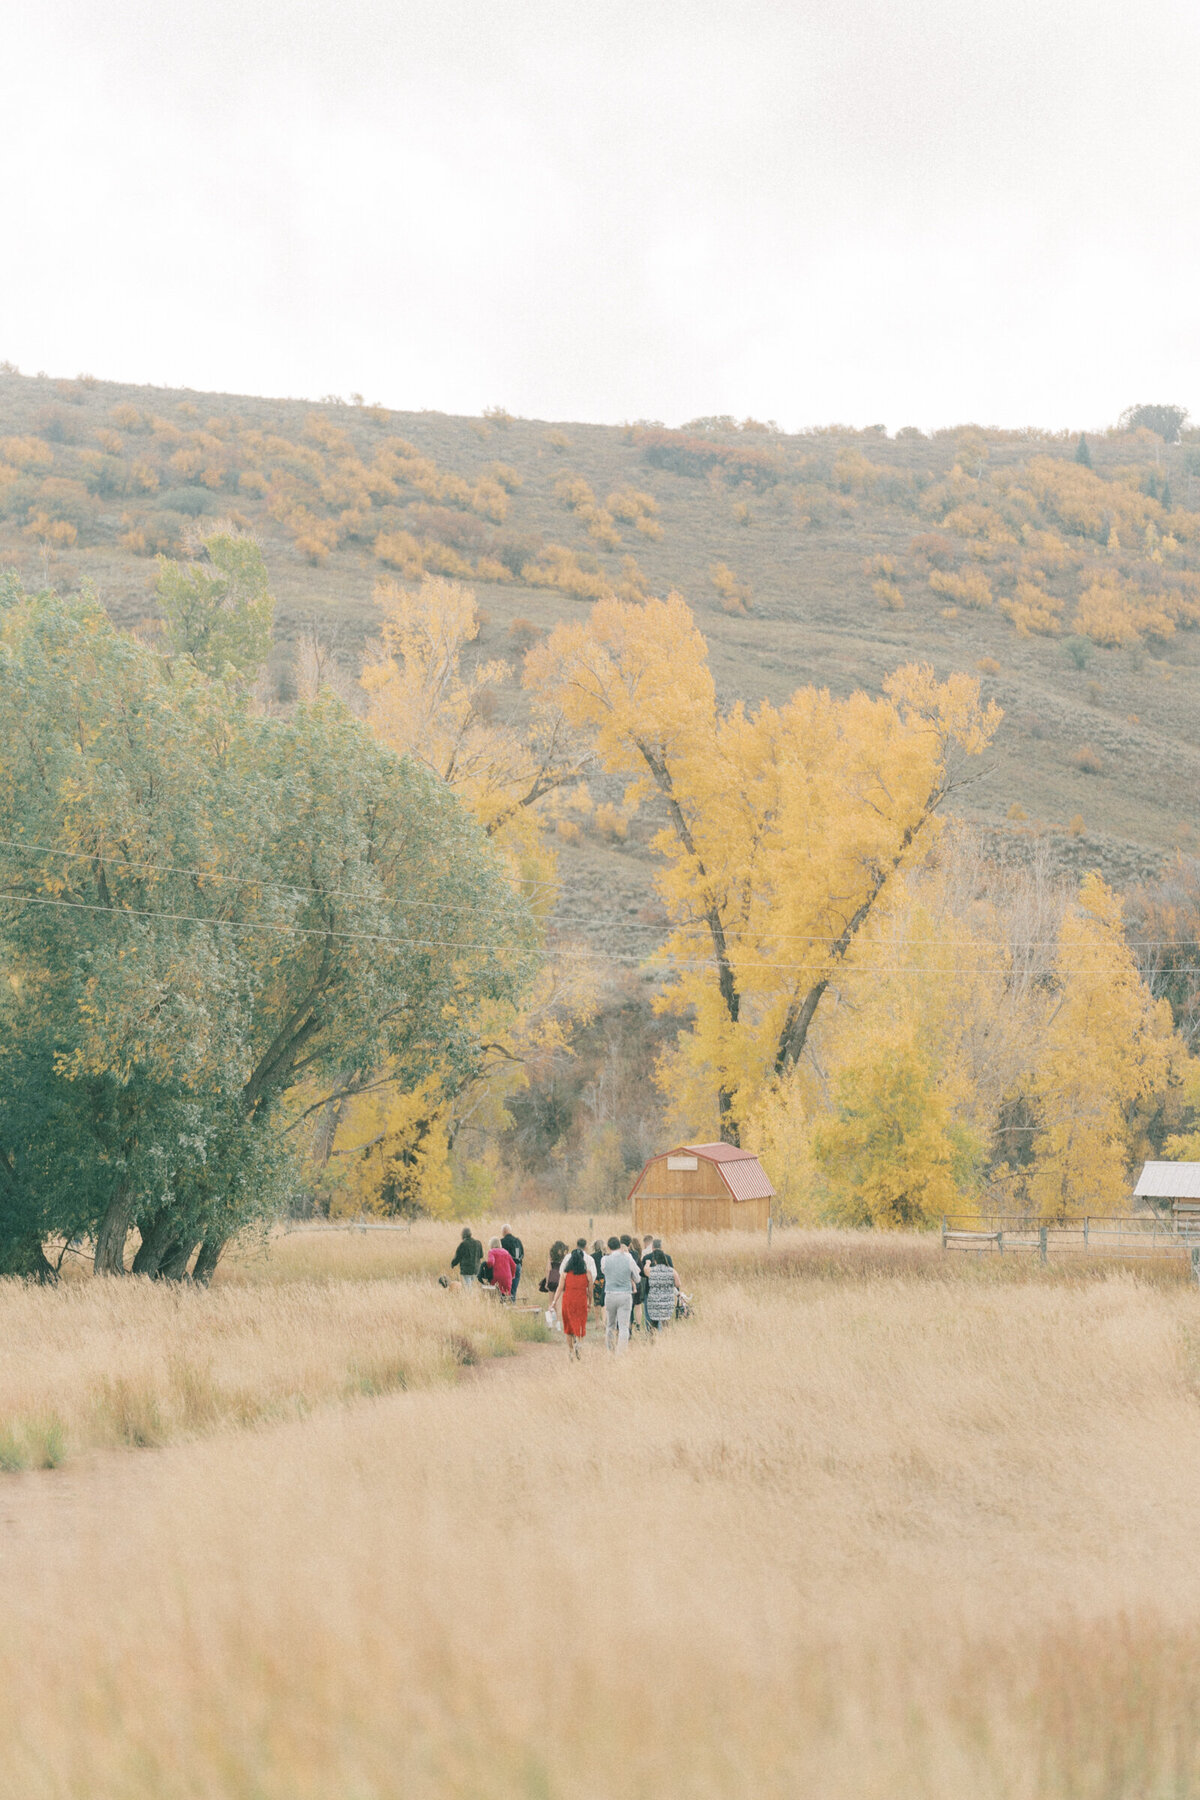 Steamboat_Springs_Ranch_wedding_Mary_Ann_craddock_photography_0030